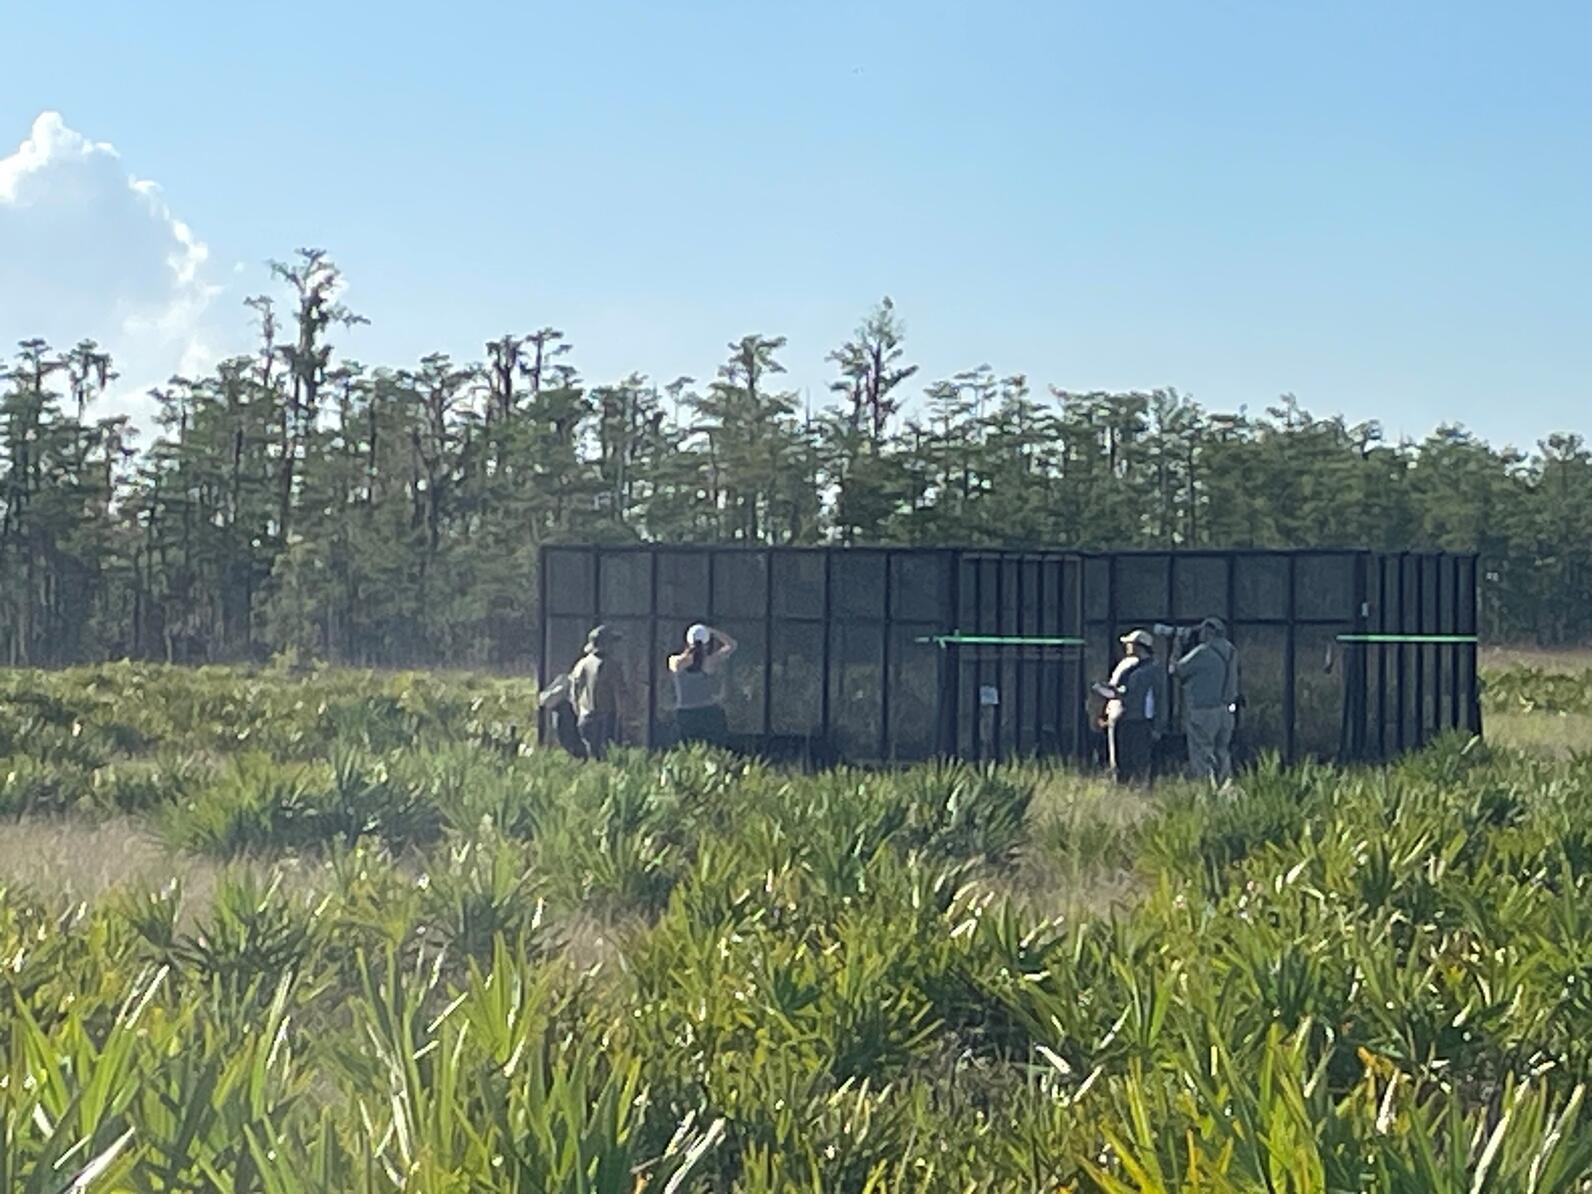 People standing around a screen enclosure in a field.